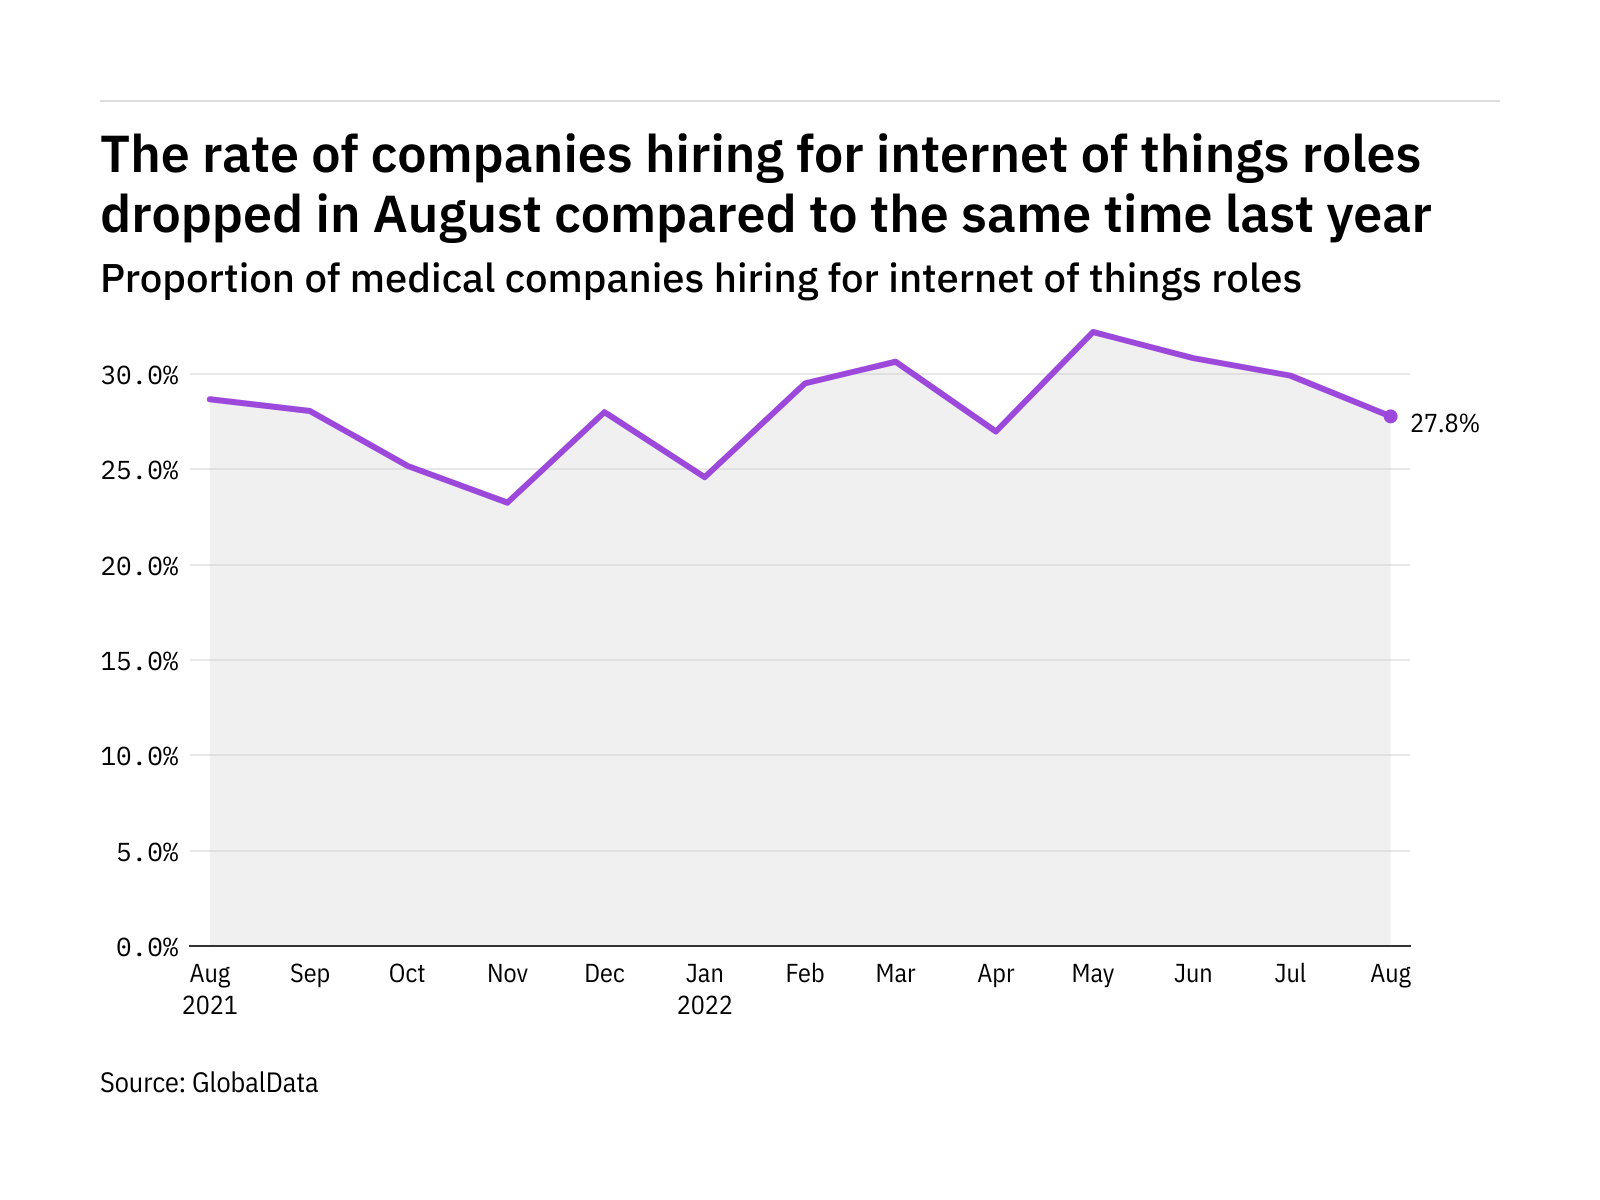 Internet of things hiring levels in the medical industry dropped in August 2022